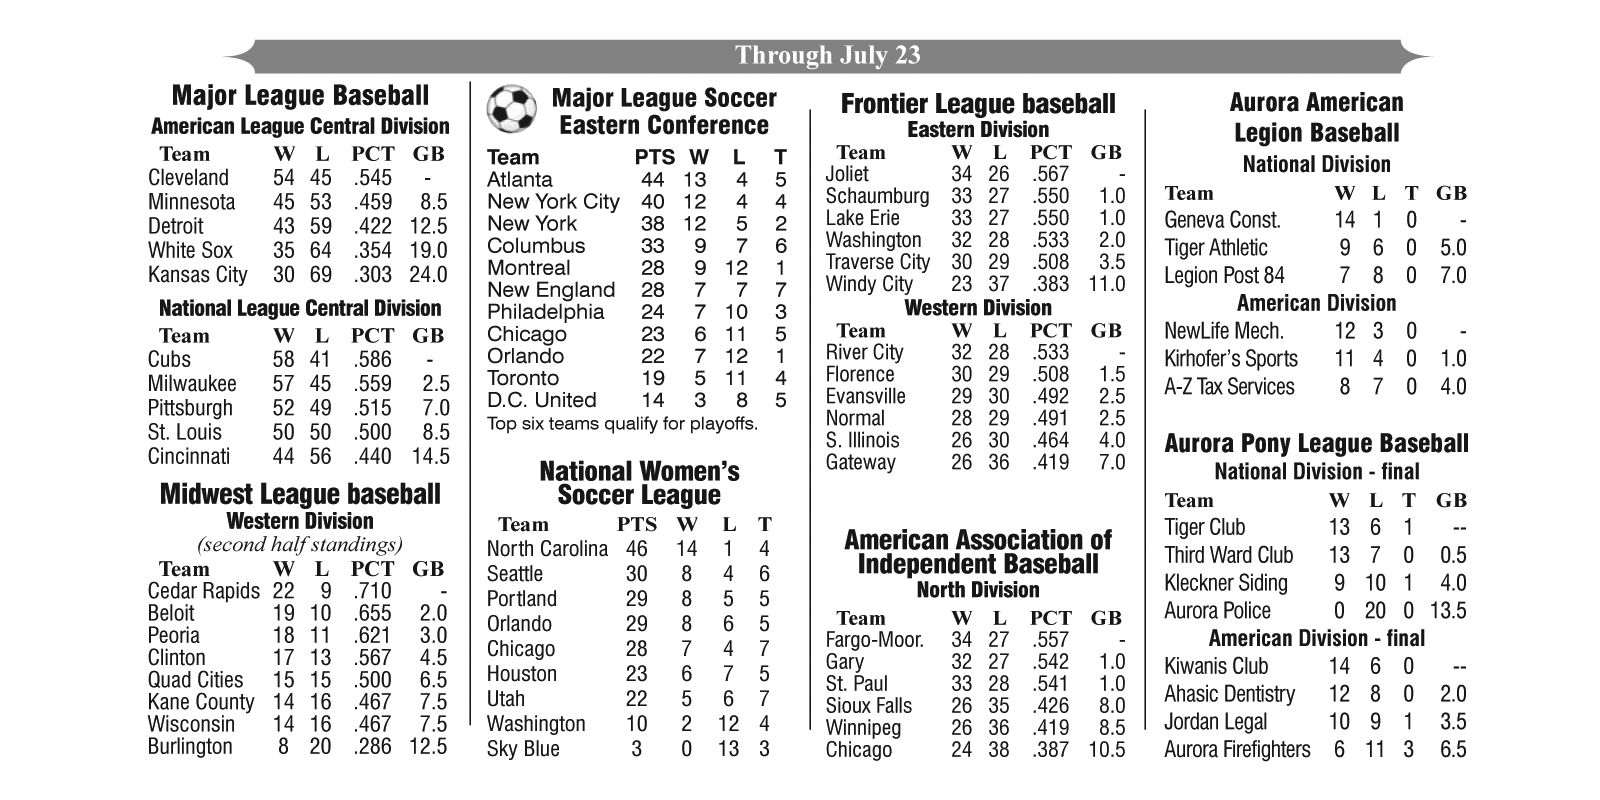 Baseball And Soccer Standings Through July 23, 2018